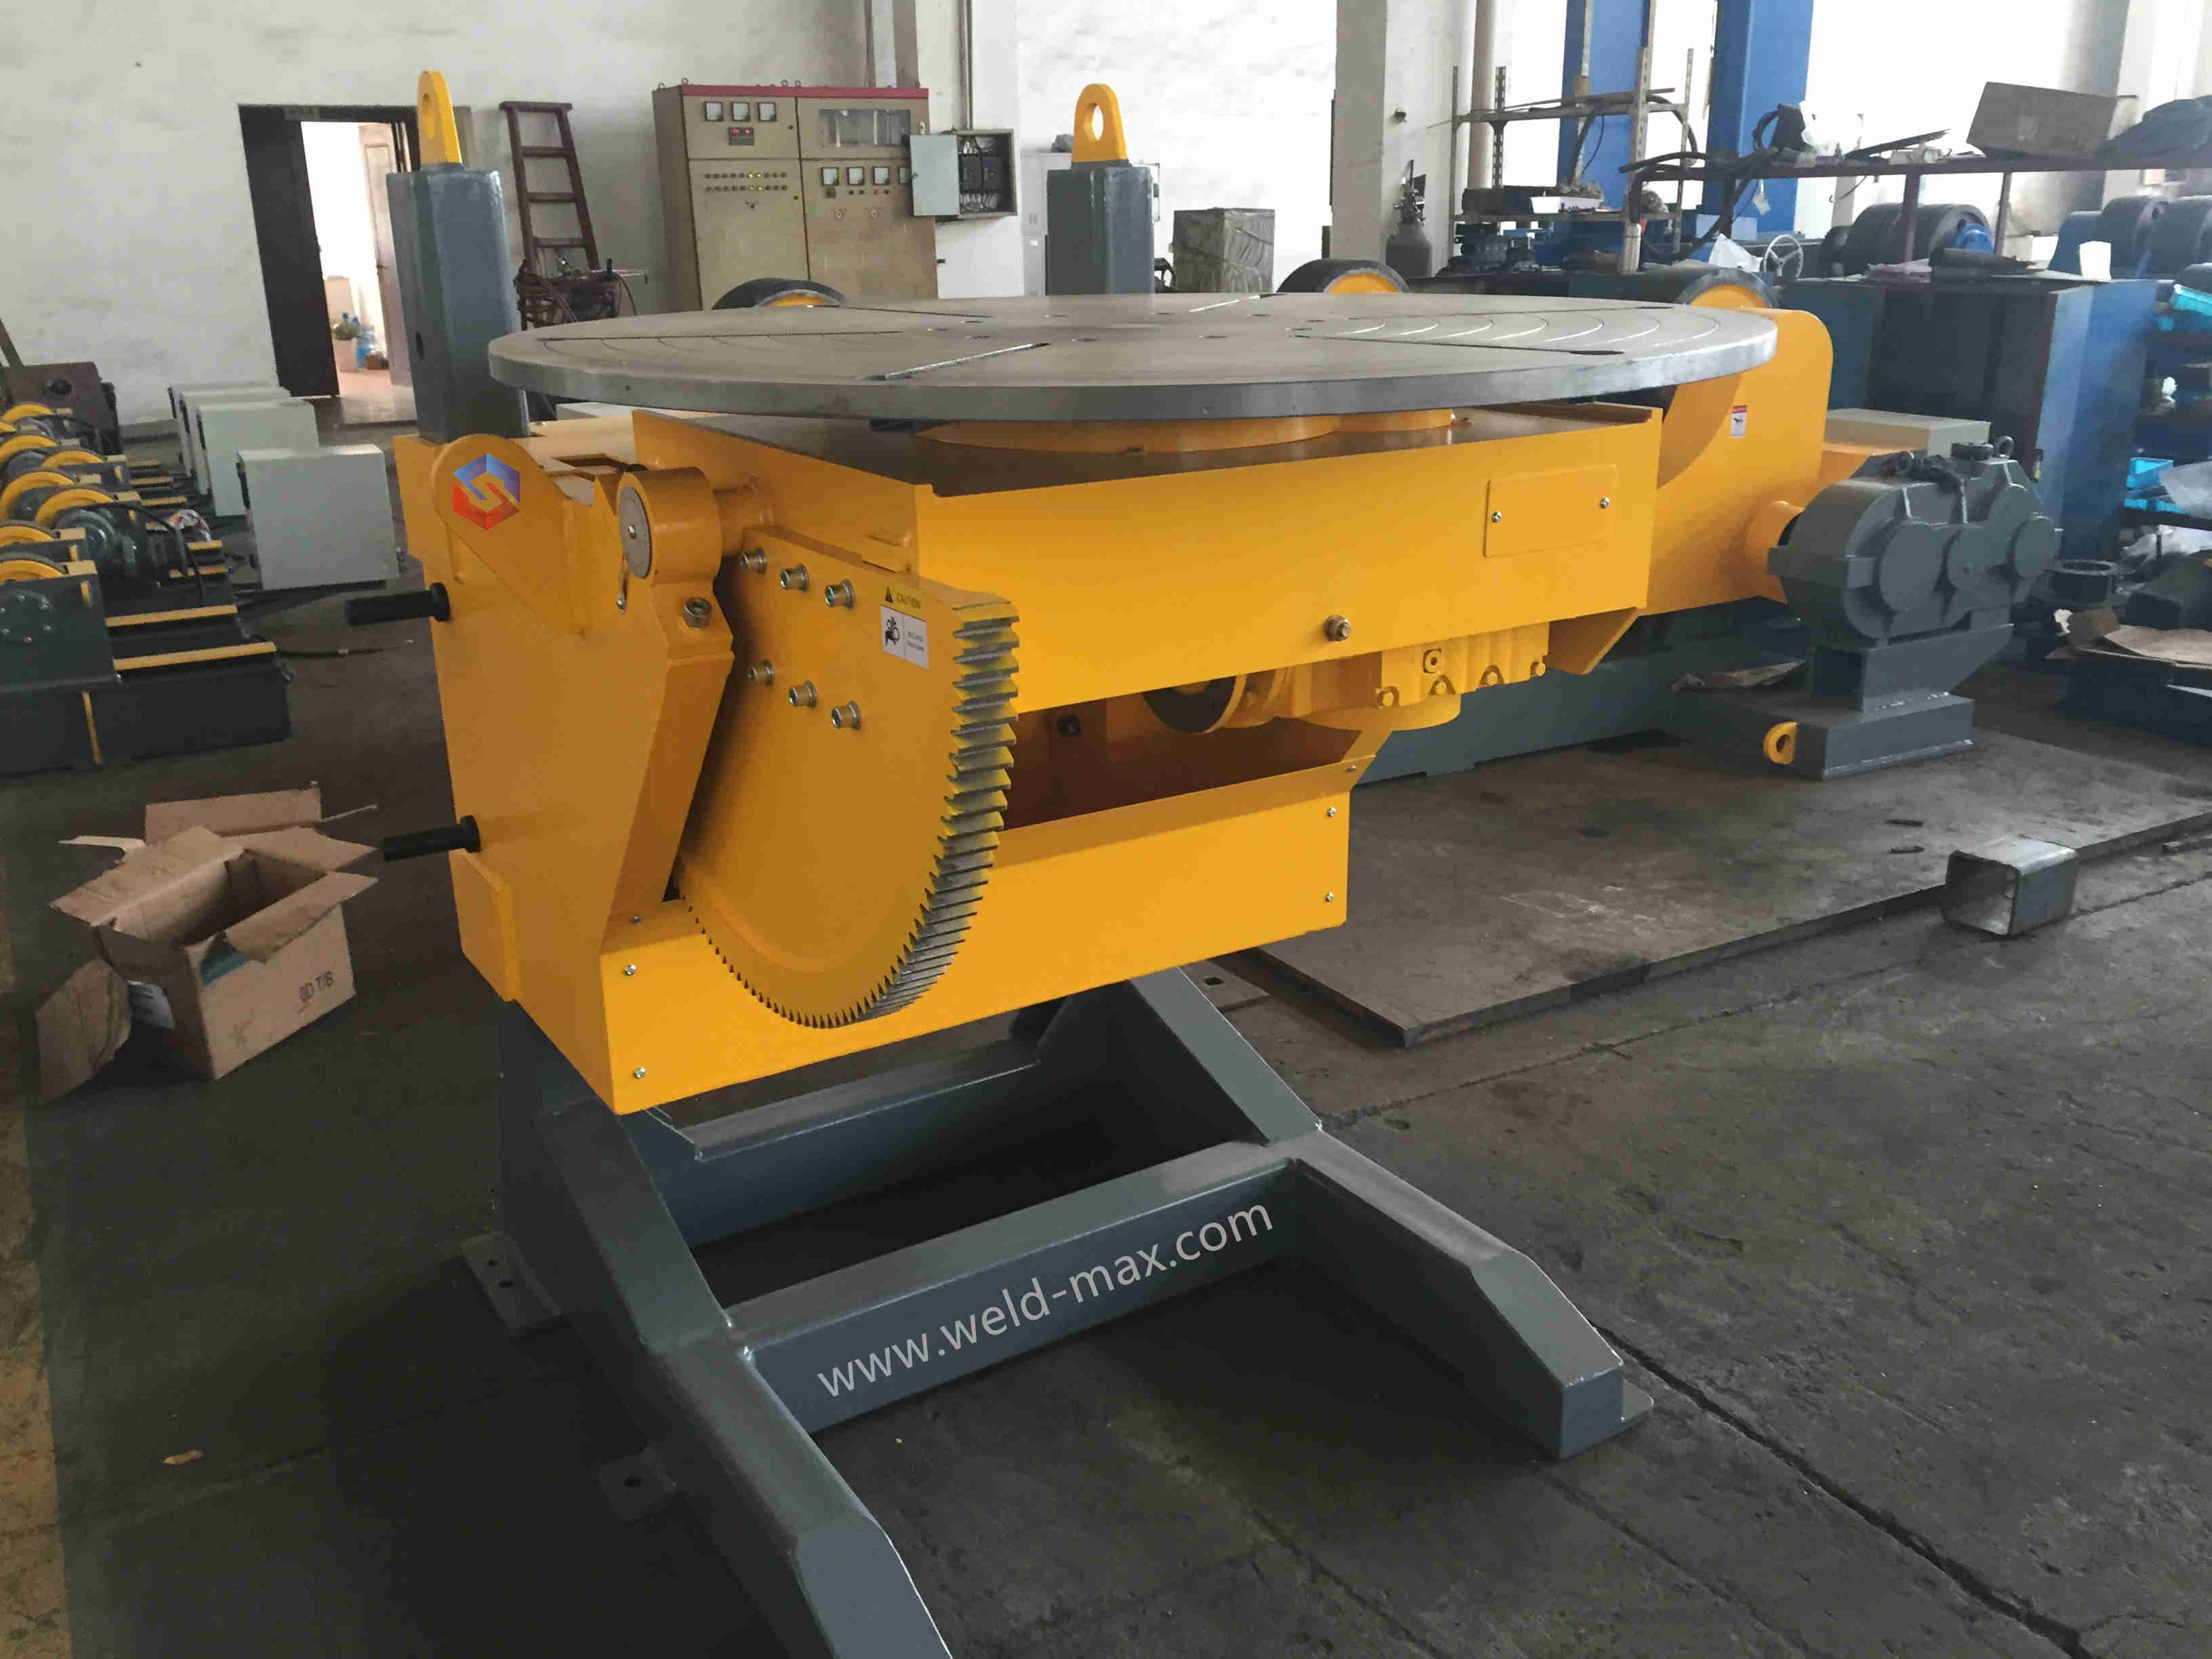 China Cheap price 250ton Welding Turning Rolls - 20T Yellow Elevating Welding Positioner With Vertical Turning Table And 5 JAWS Chuck – Sanlian